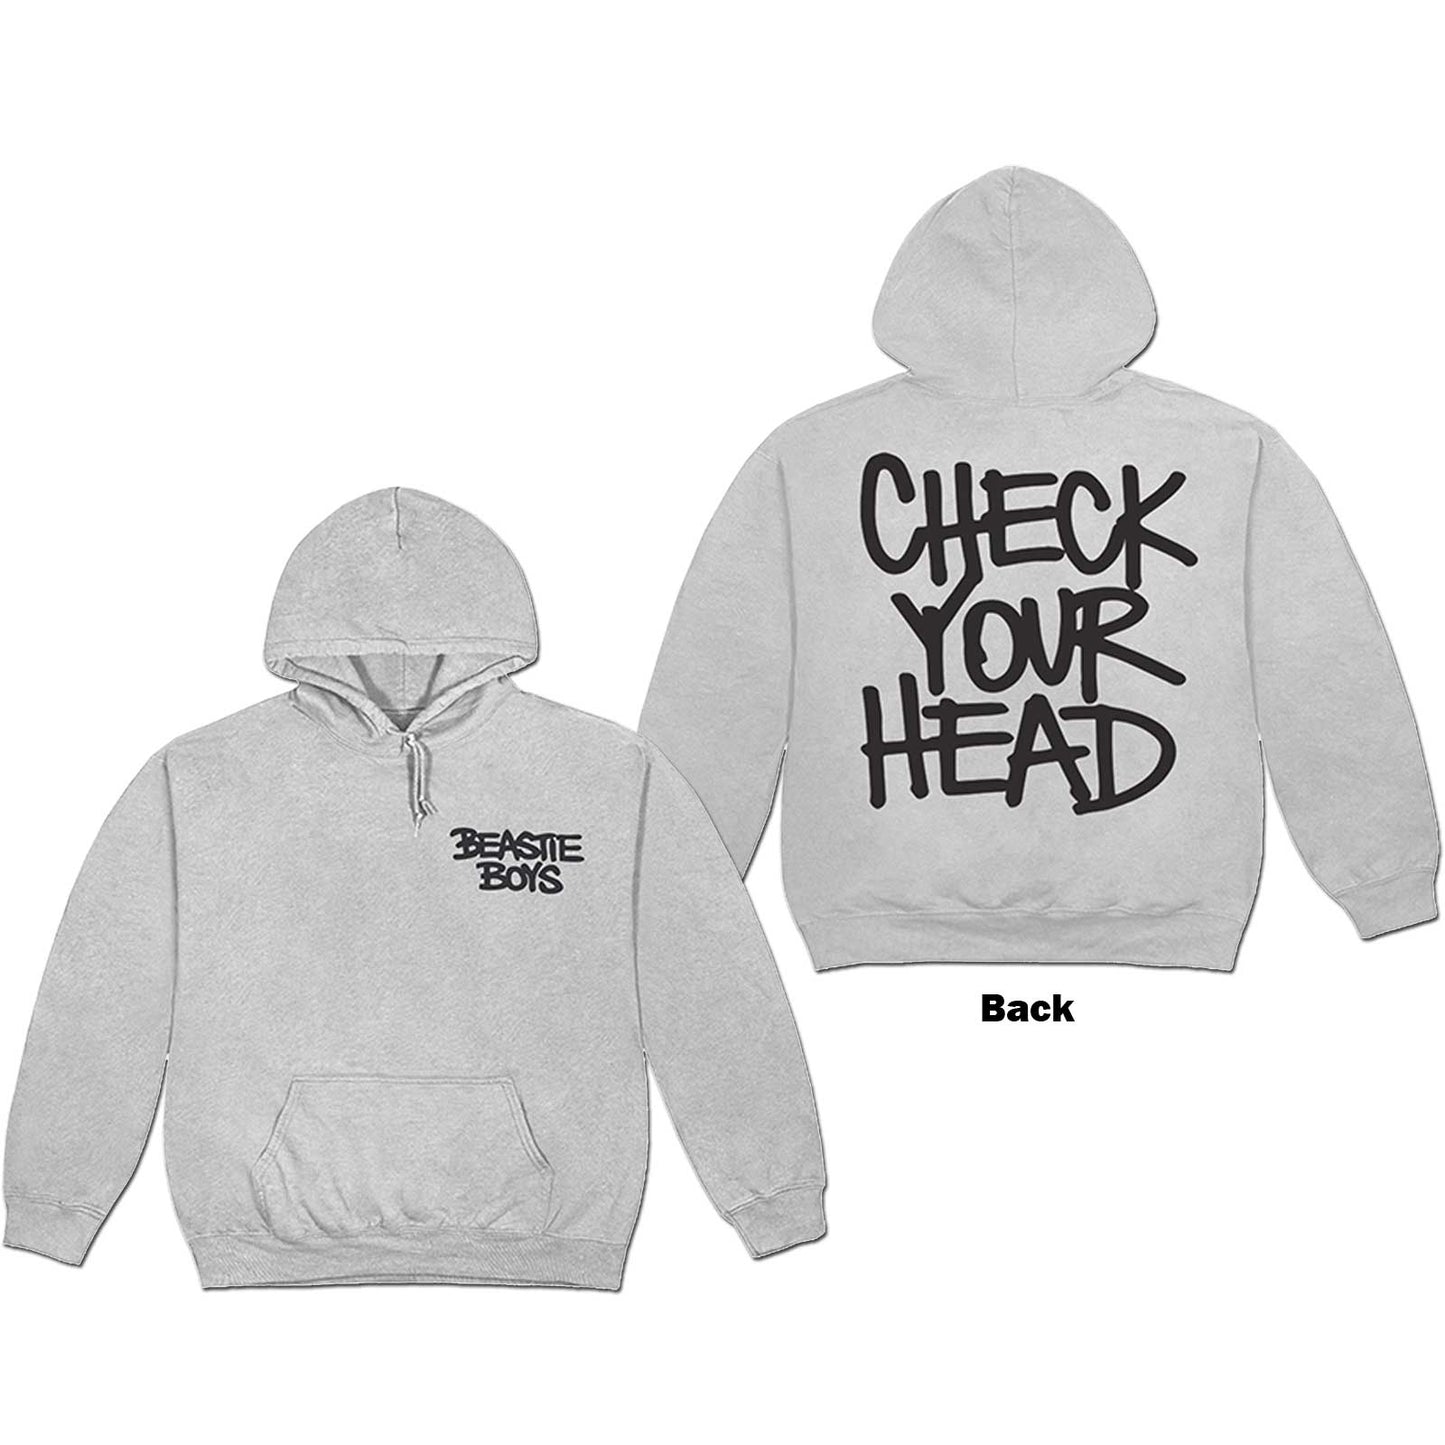 The Beastie Boys Pullover Hoodie: Check Your Head